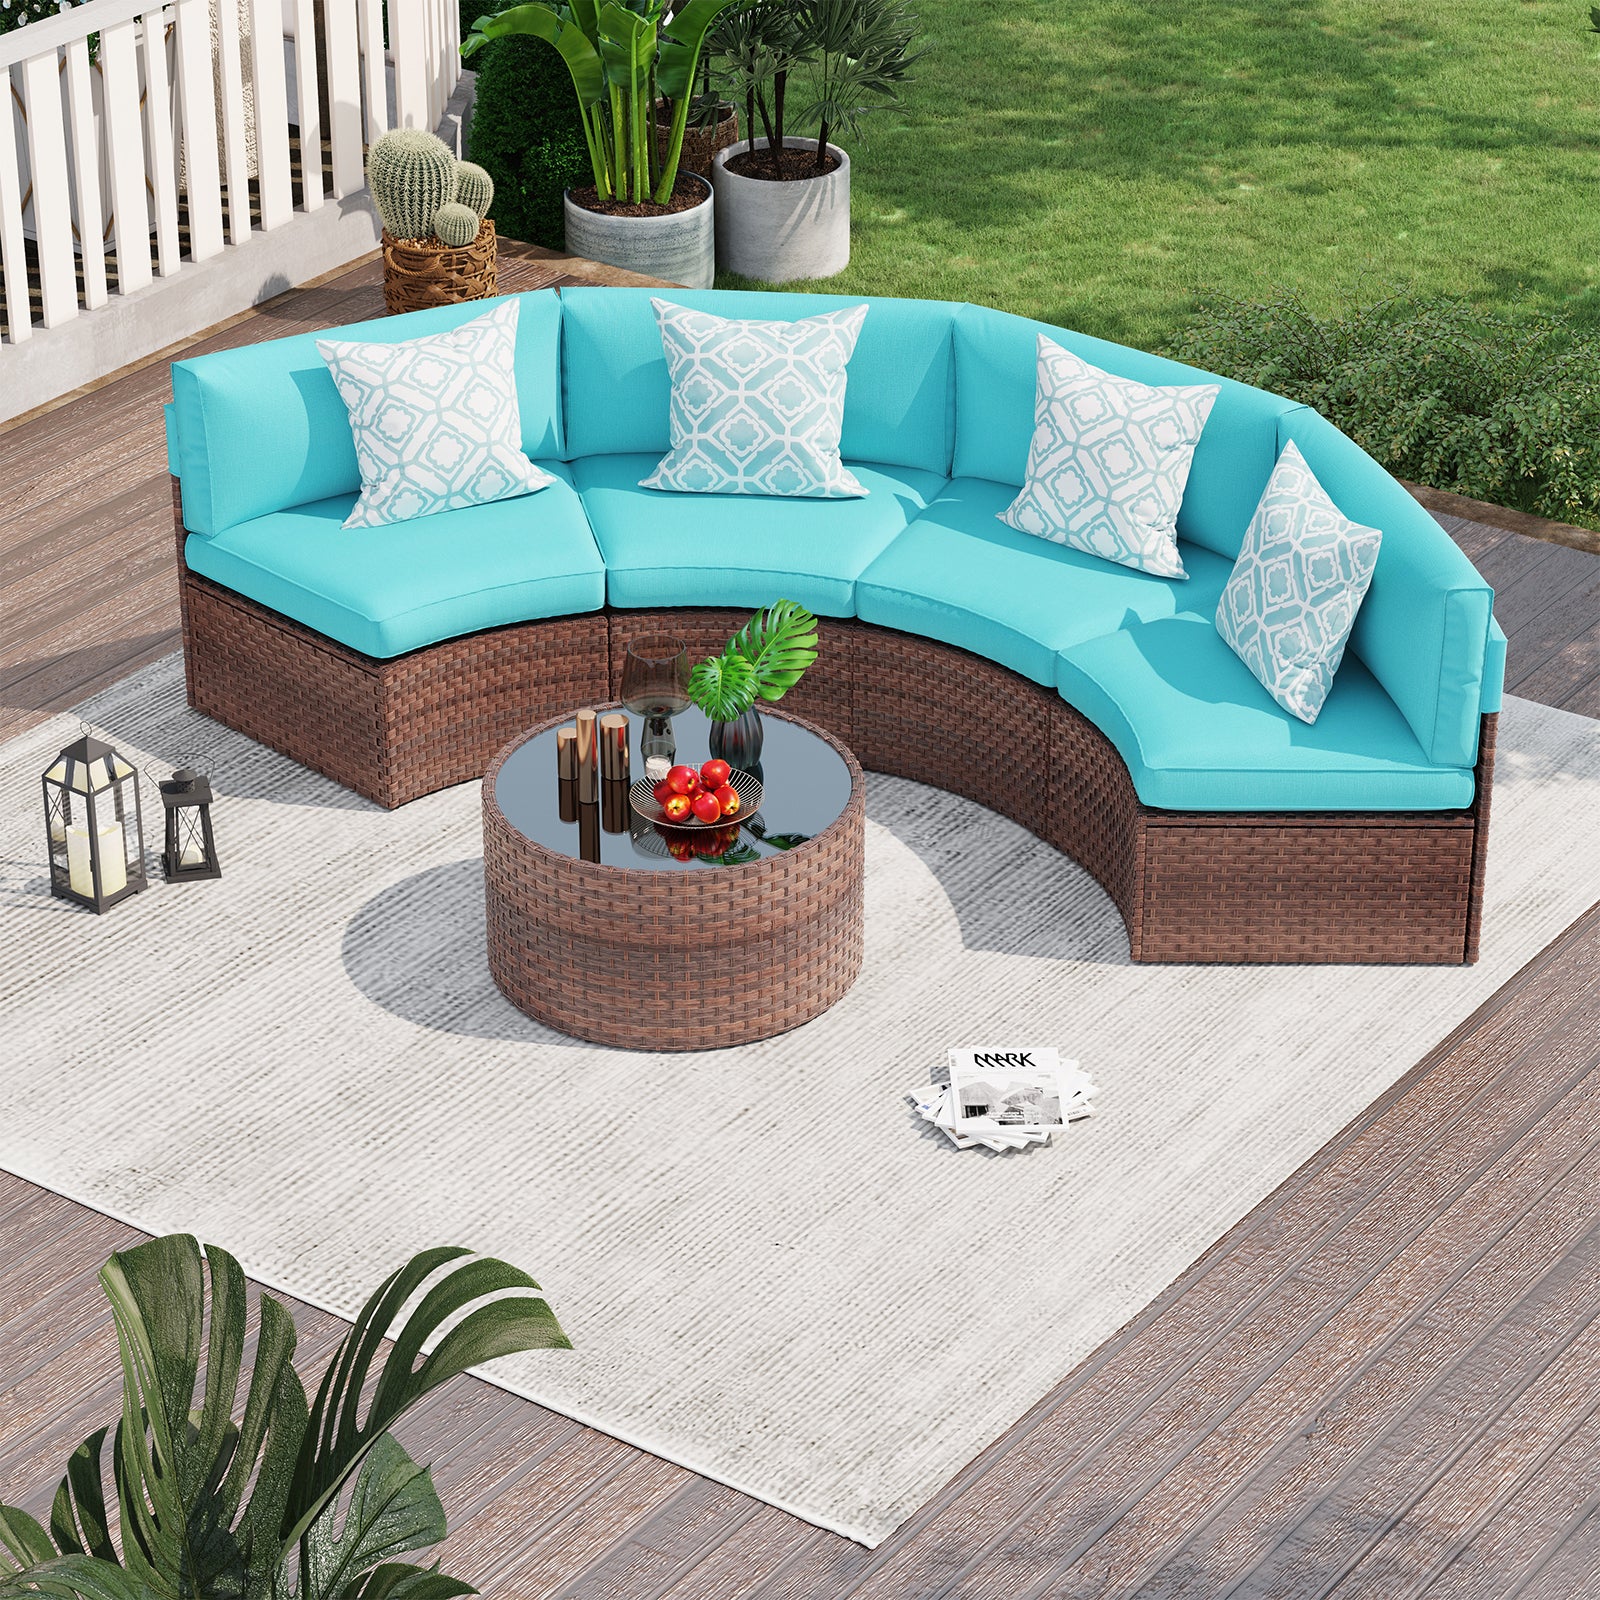 5pcs Outdoor Curved Sofas Wicker Half-Moon Sectional Set, 4 Colors | Orange-Casual